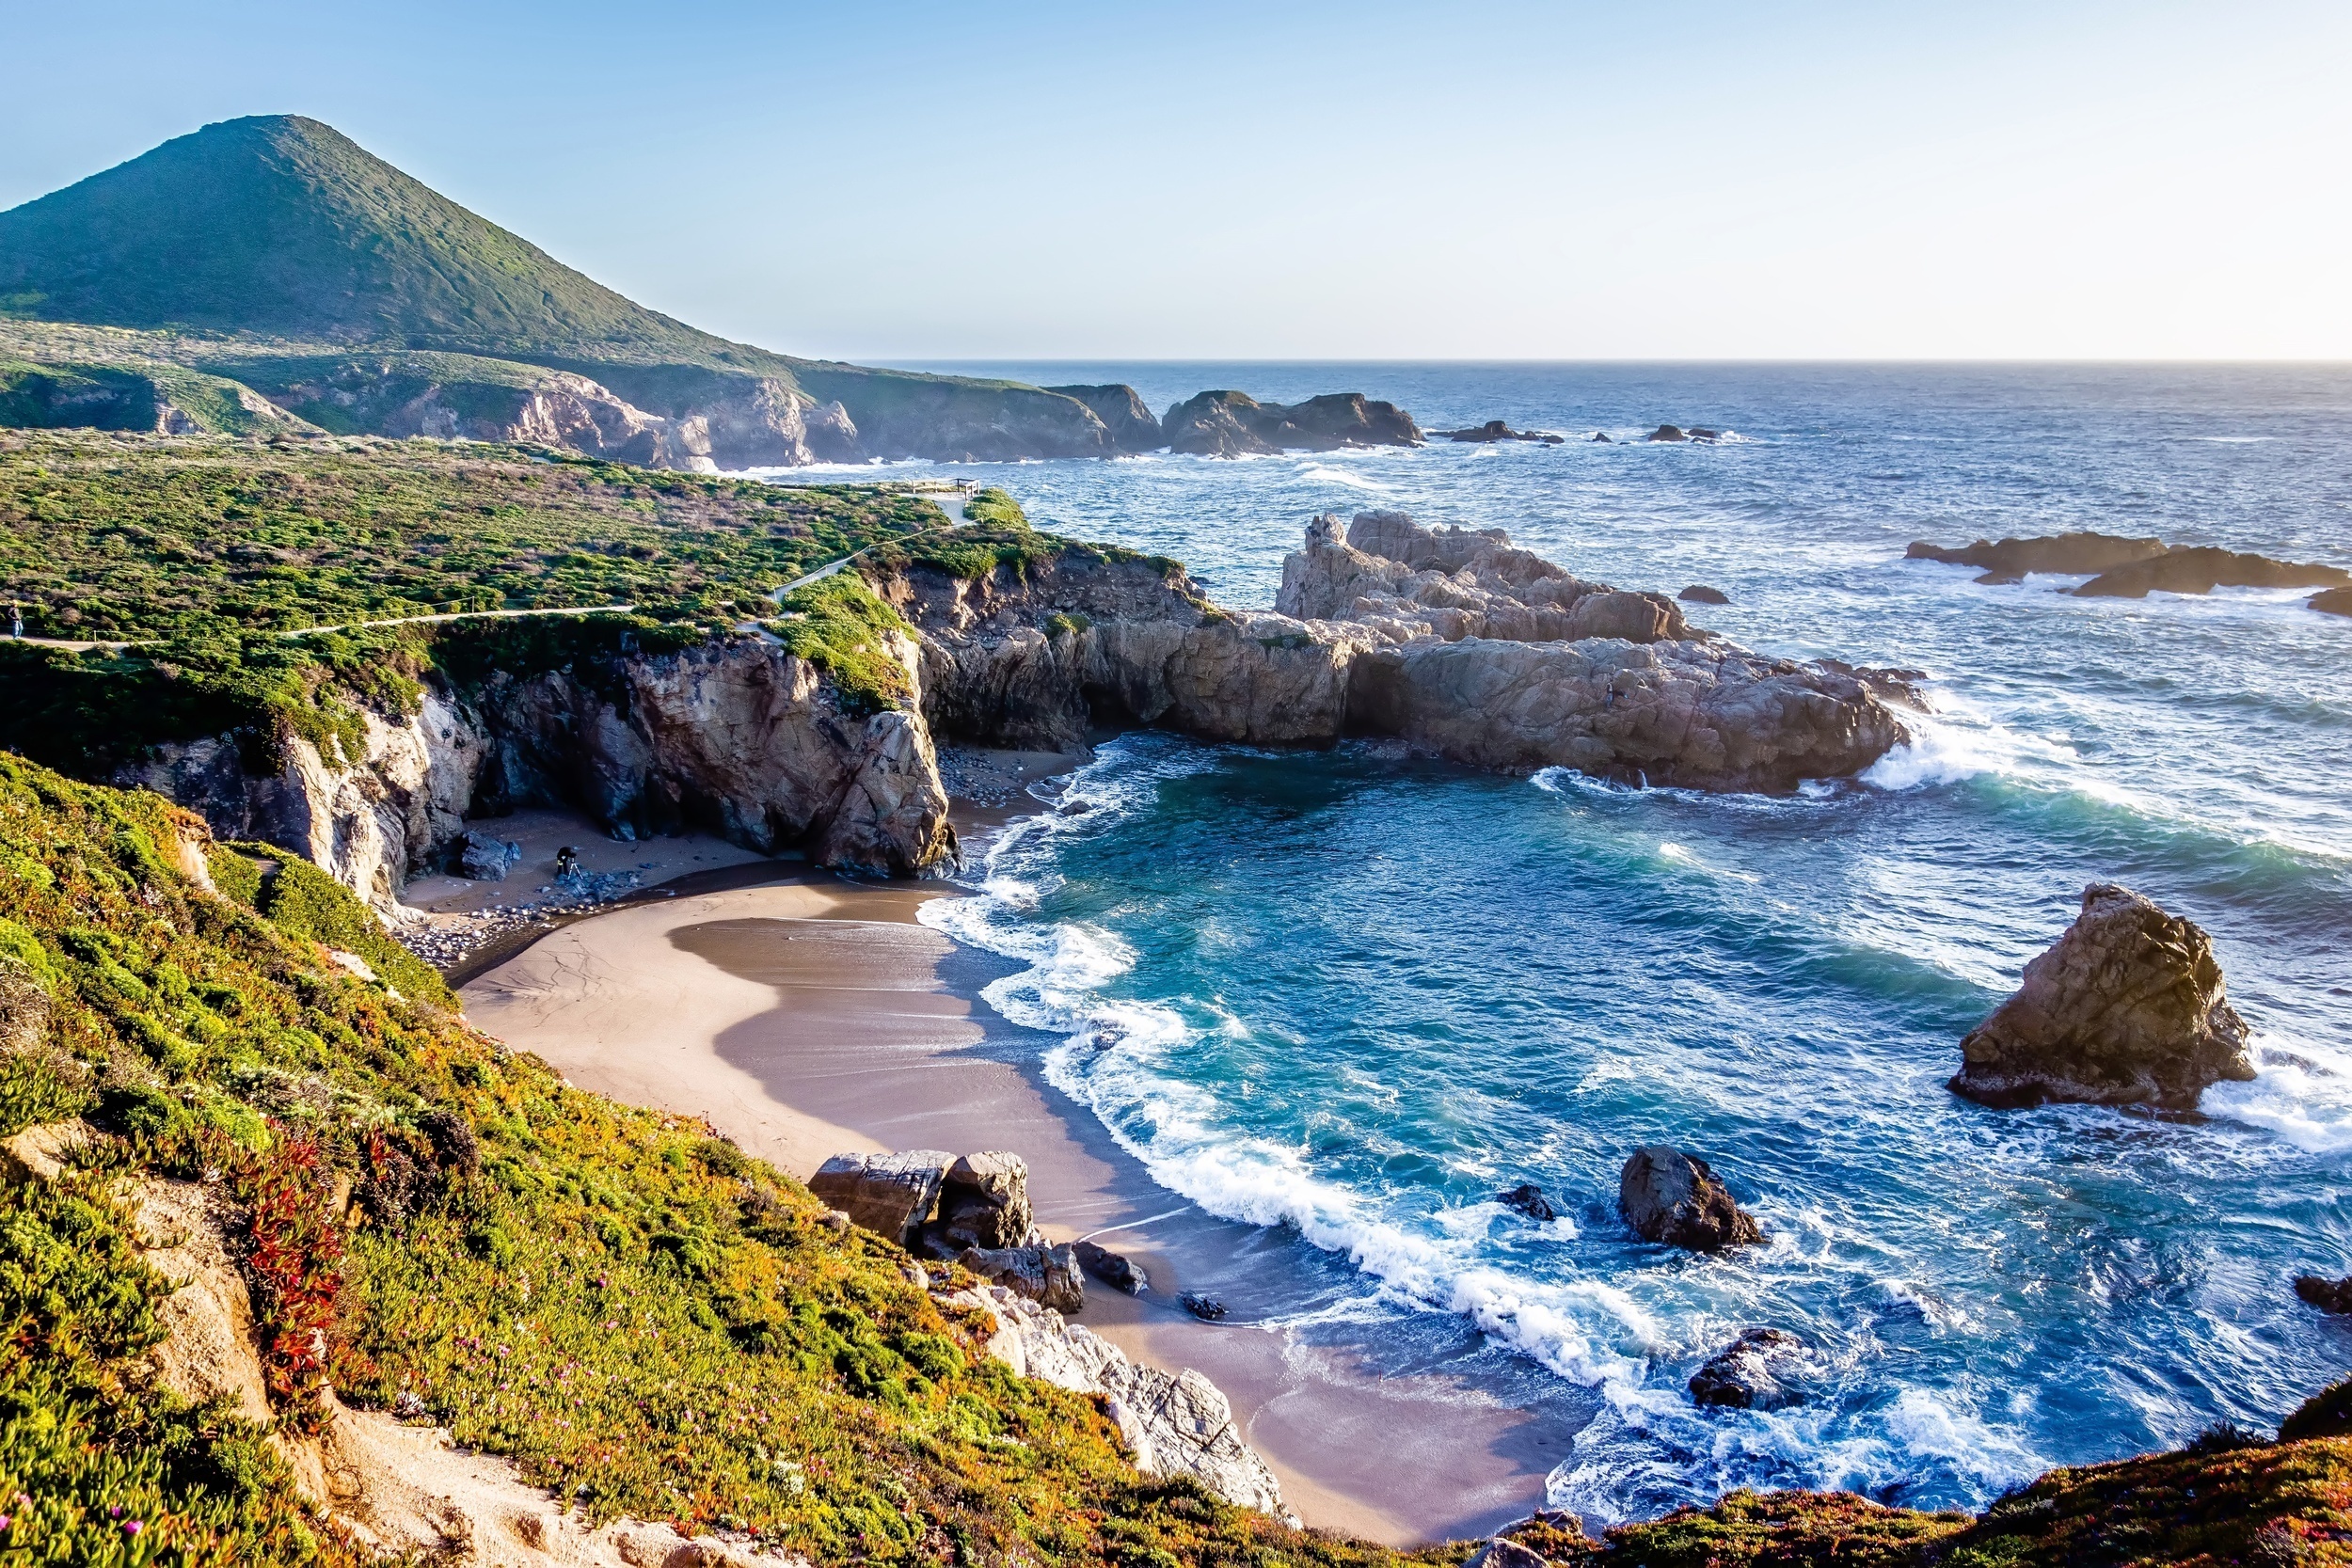 <p>The West Coast is known for its amazing beaches, but how do you decide where to go? Don't worry; we've got you covered with 14 of the most beautiful beach towns below!</p>